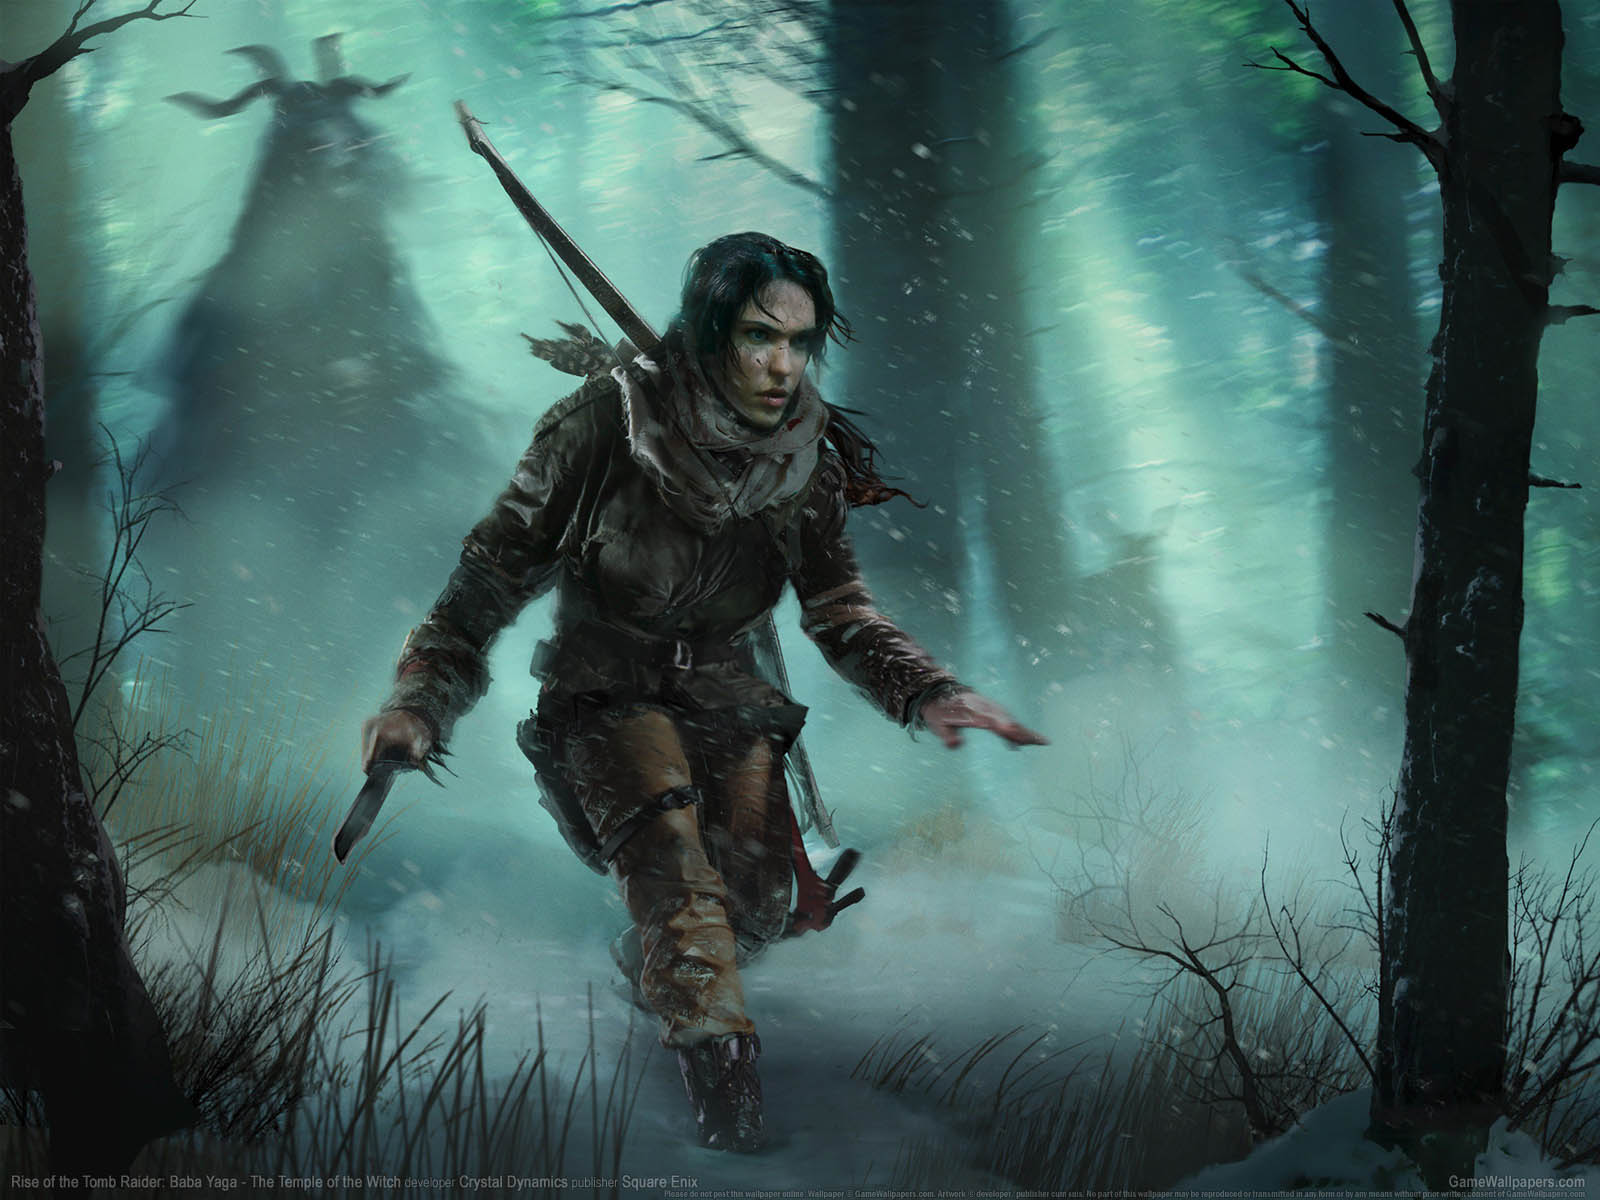 Rise of the Tomb Raider%25253A Baba Yaga - The Temple of the Witch wallpaper 01 1600x1200